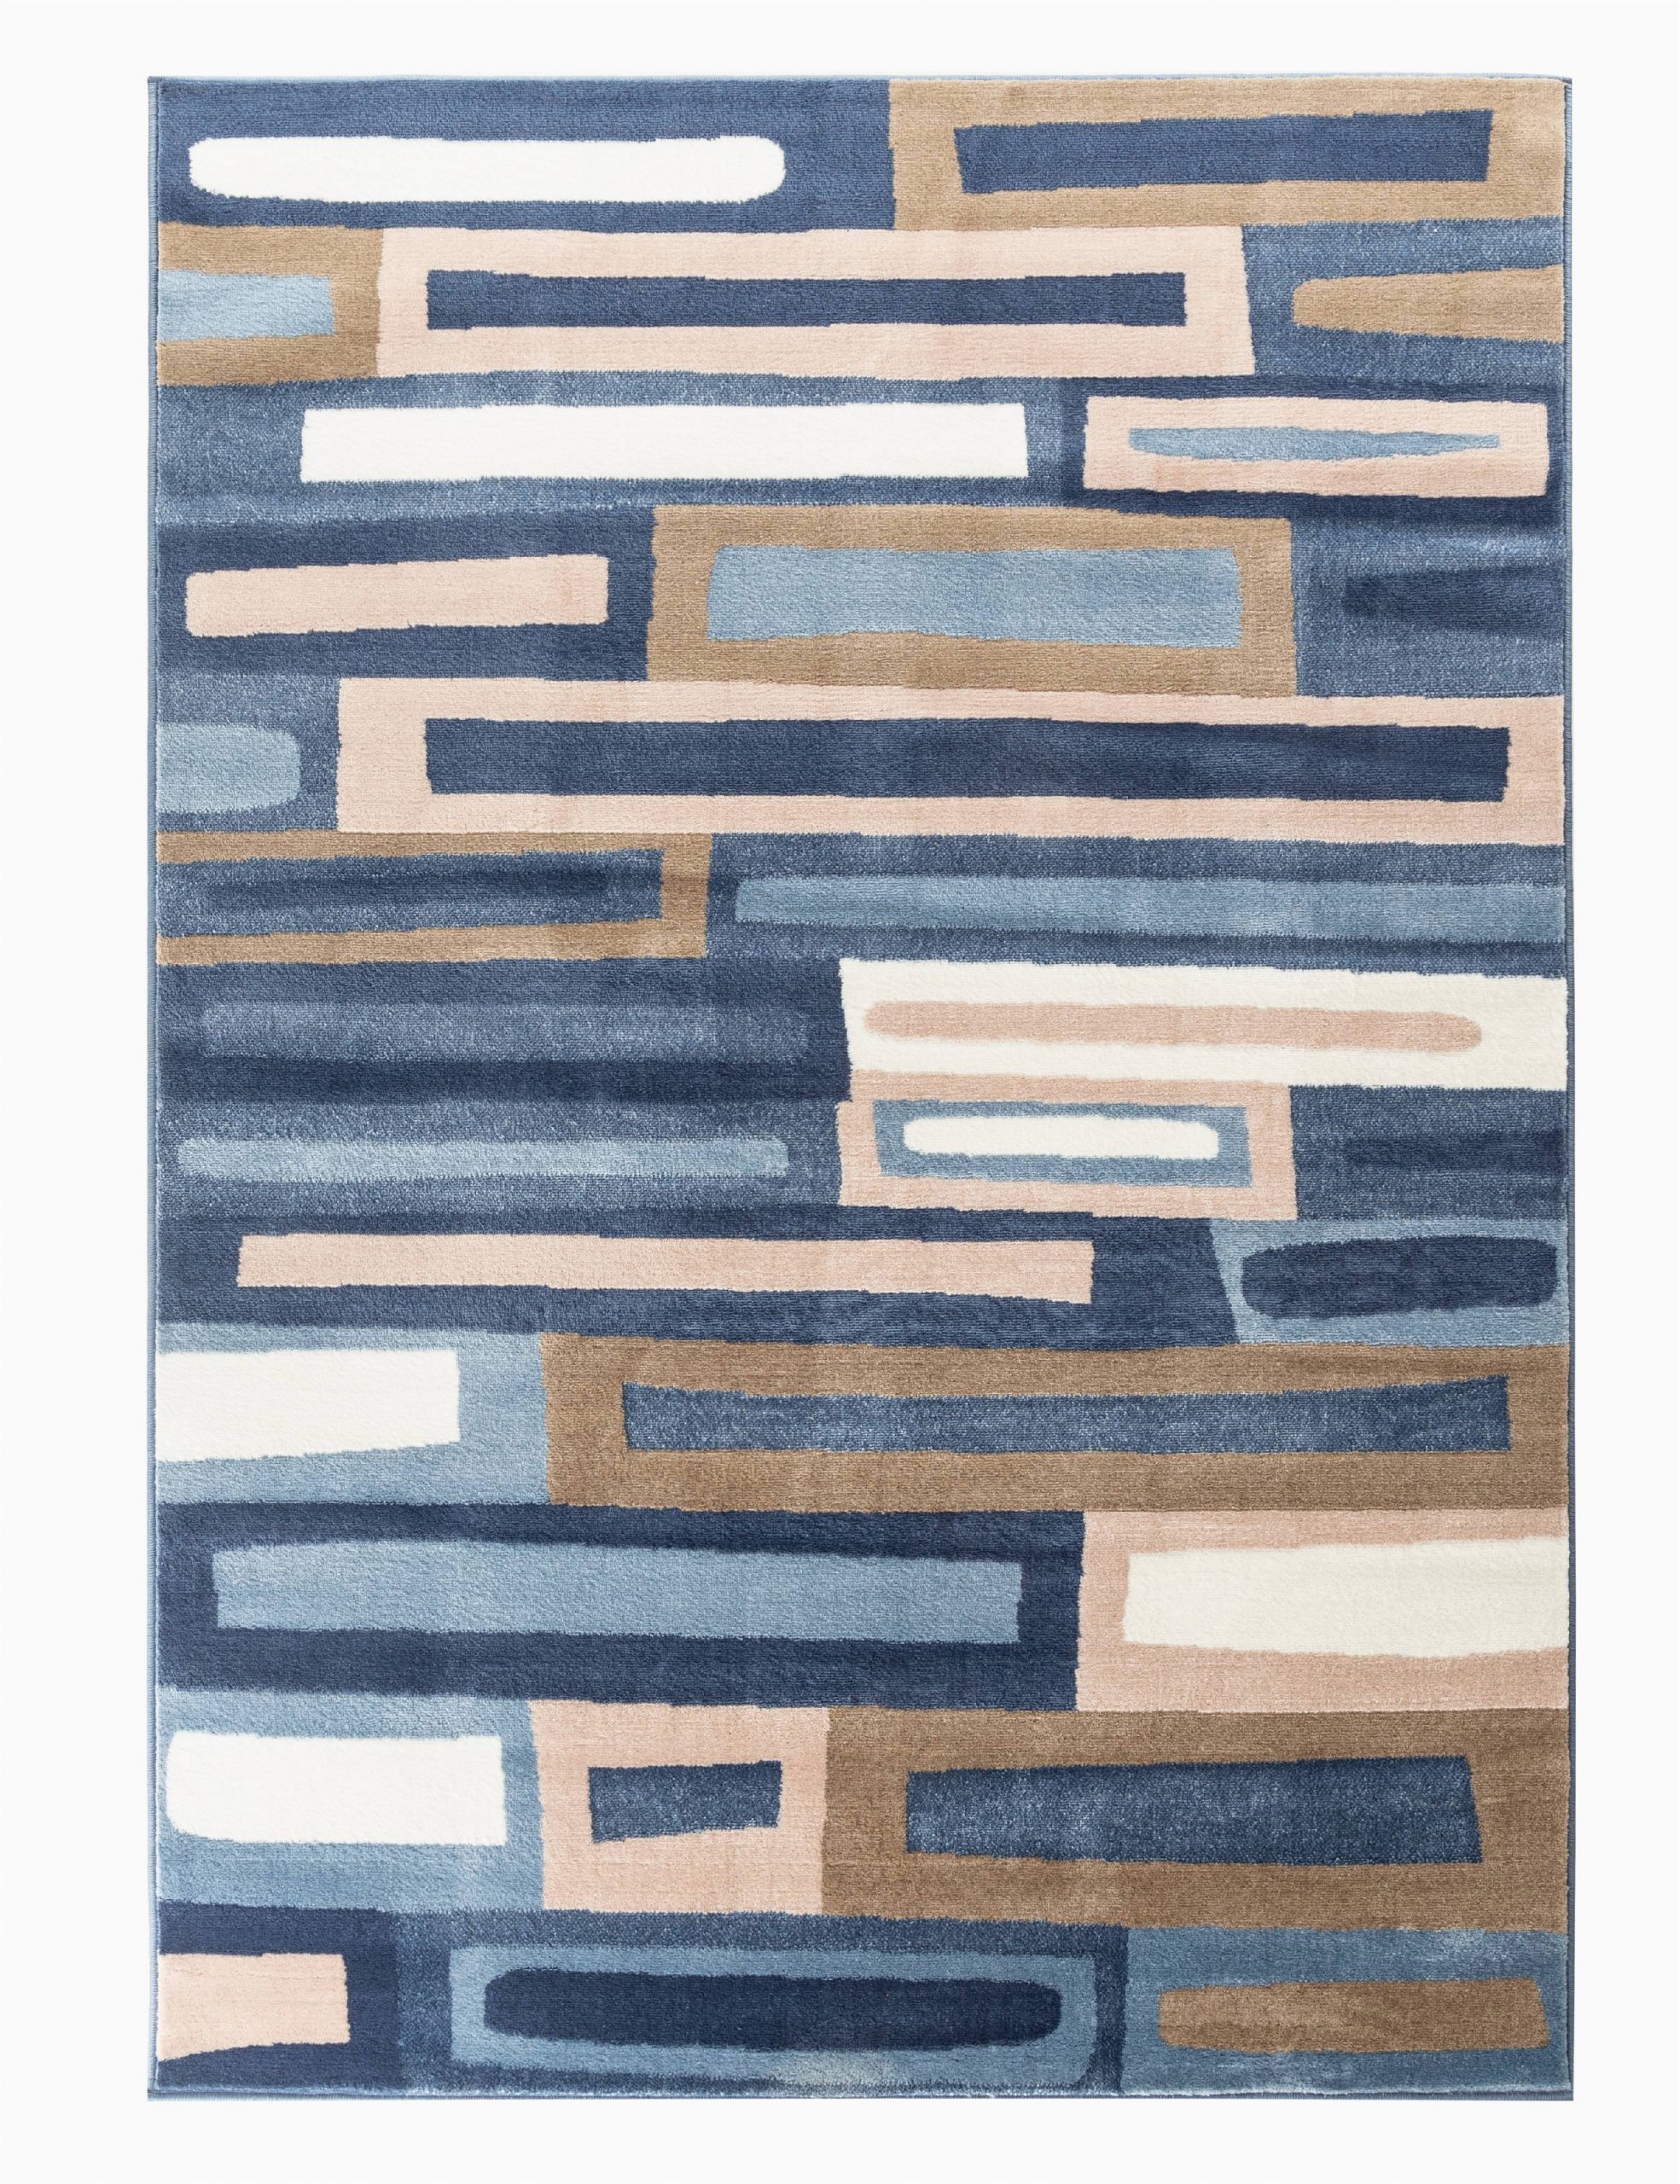 Blue and Brown Living Room Rugs Romance Collection Rugs Blue Brown Cream White Geometric Abstract Design Premium soft area Rug 51 X 72 Rug Size Walmart Com